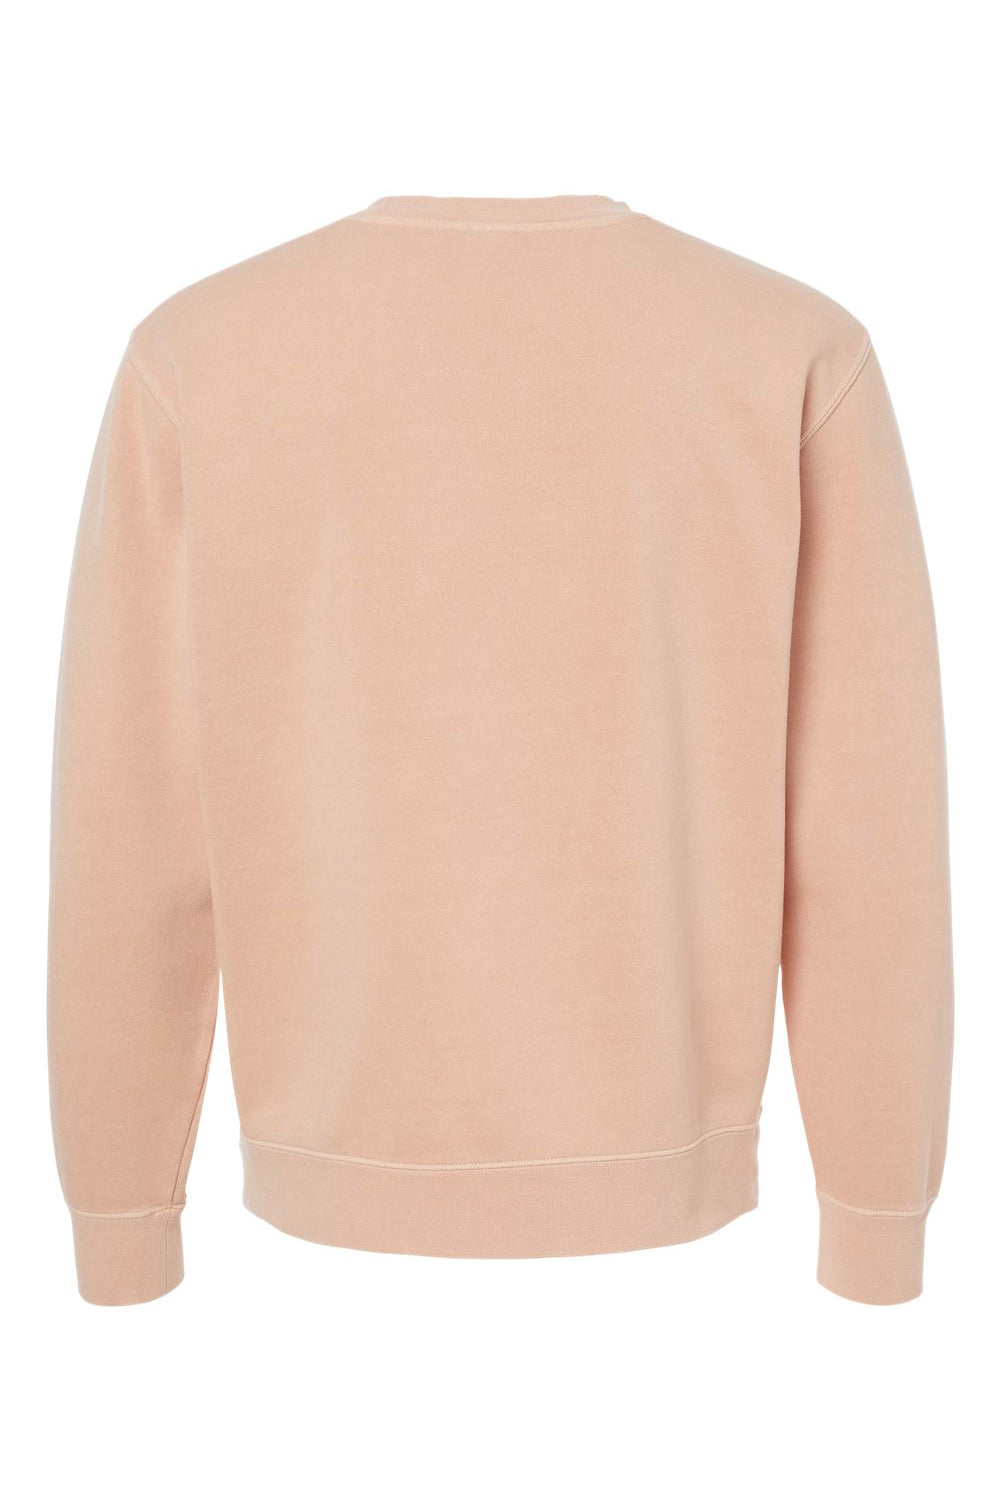 Independent Trading Co. PRM3500 Mens Pigment Dyed Crewneck Sweatshirt Dusty Pink Flat Back